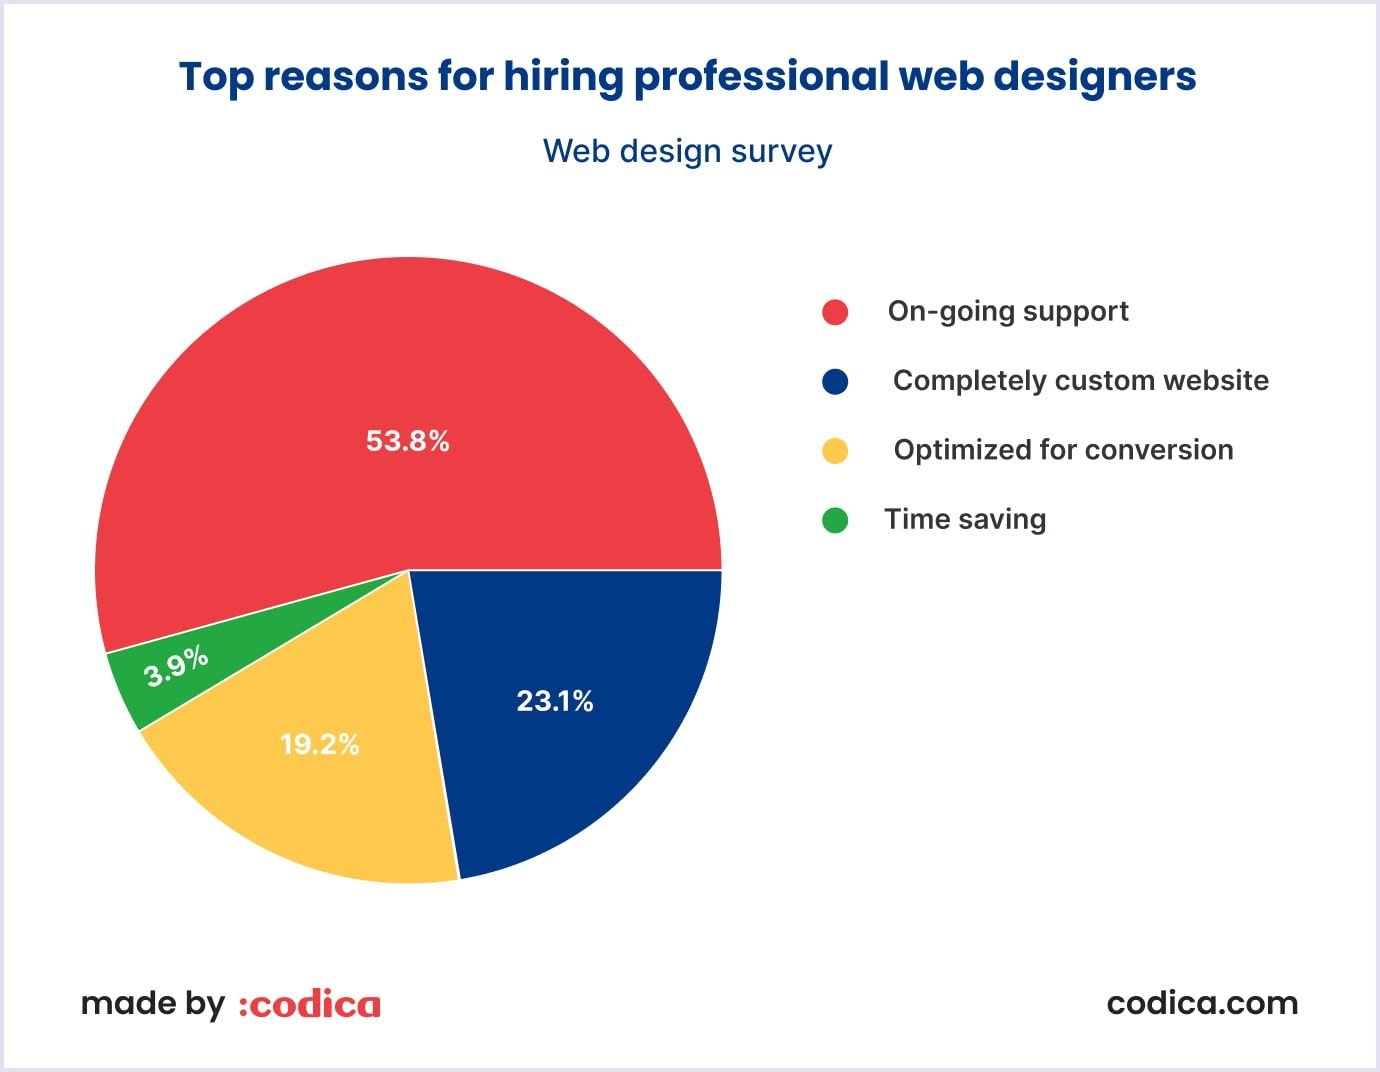 Top reasons for hiring qualified web designer